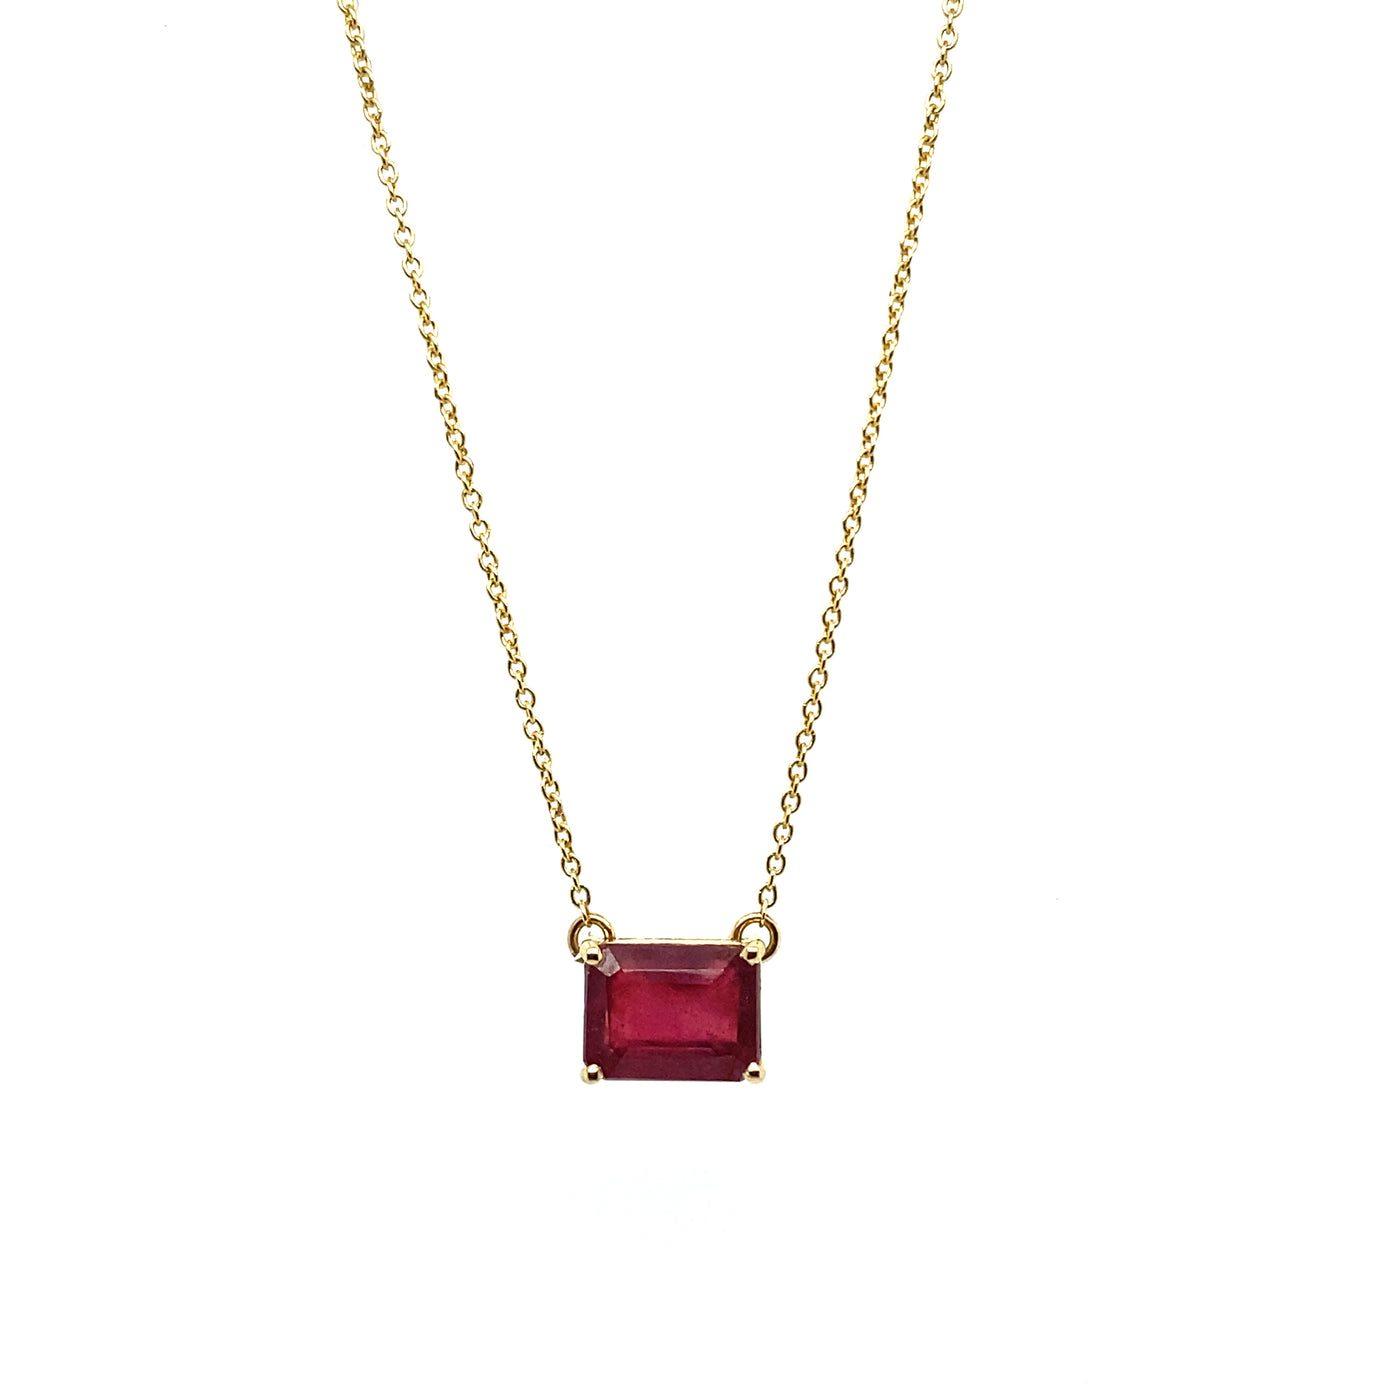 14ct yellow gold and emerald cut ruby, east to west style necklace.